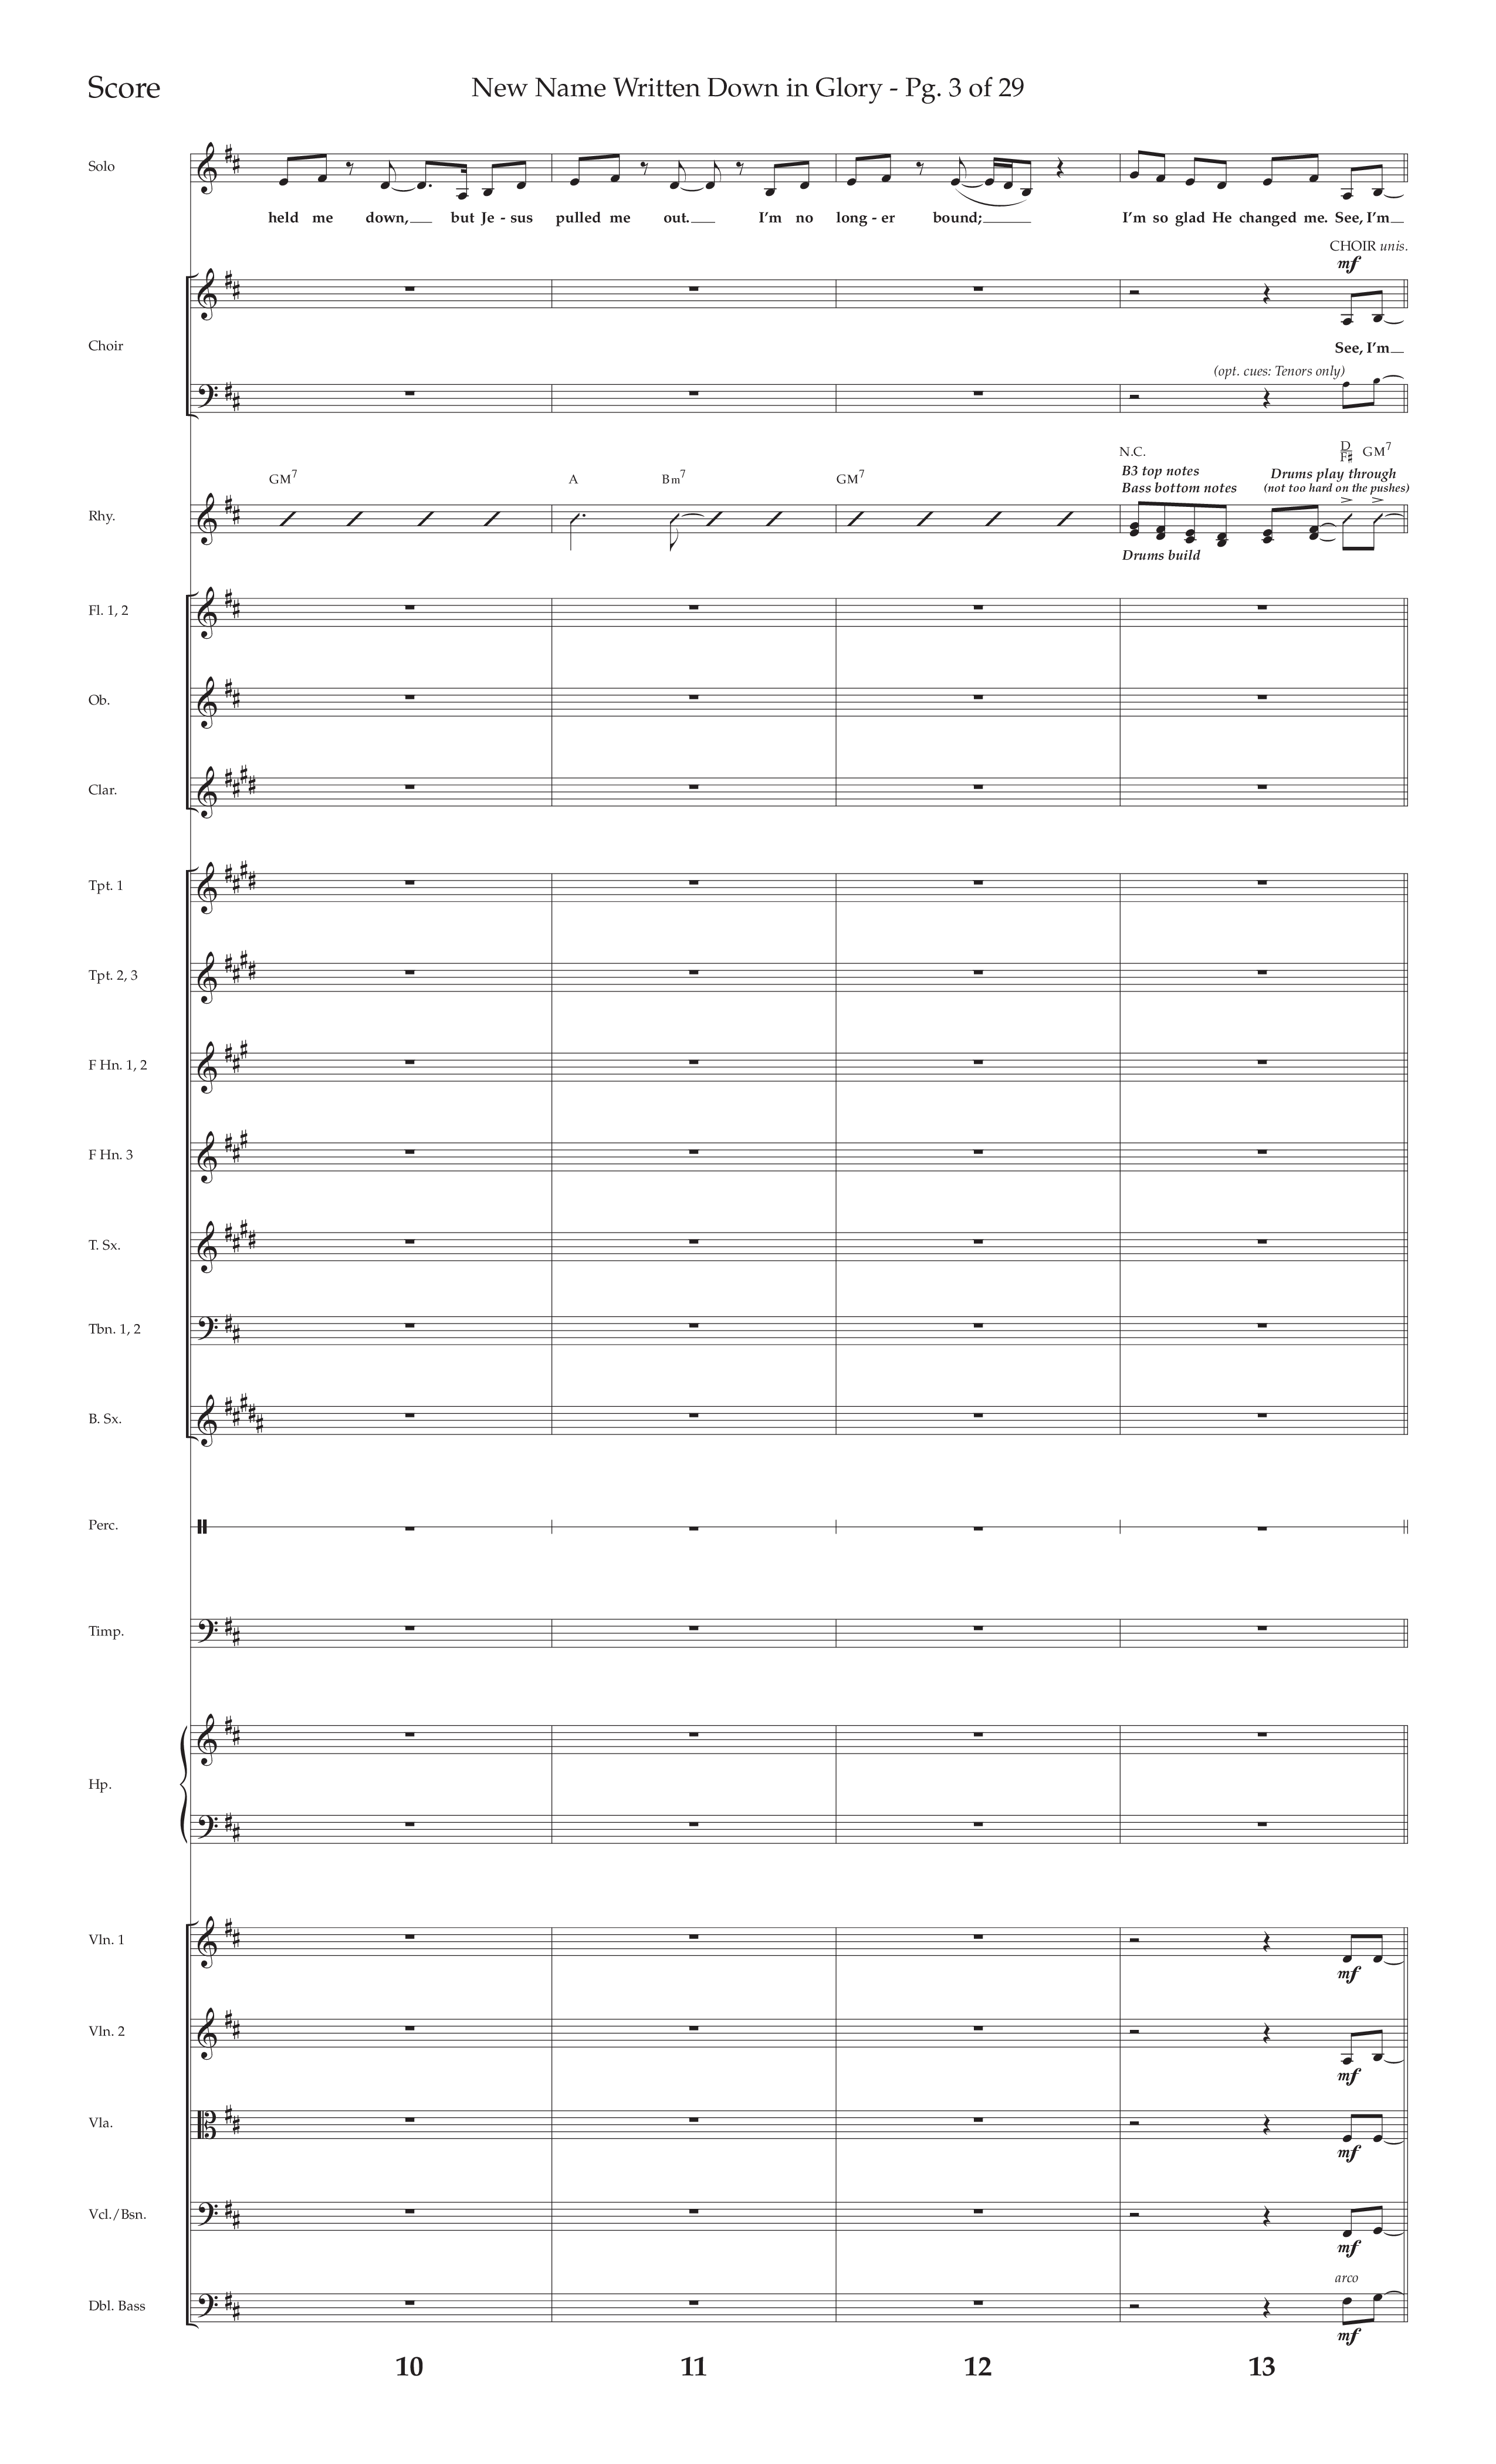 New Name Written Down In Glory (Choral Anthem SATB) Conductor's Score (Lifeway Choral / Arr. David Wise / Orch. Bradley Knight)